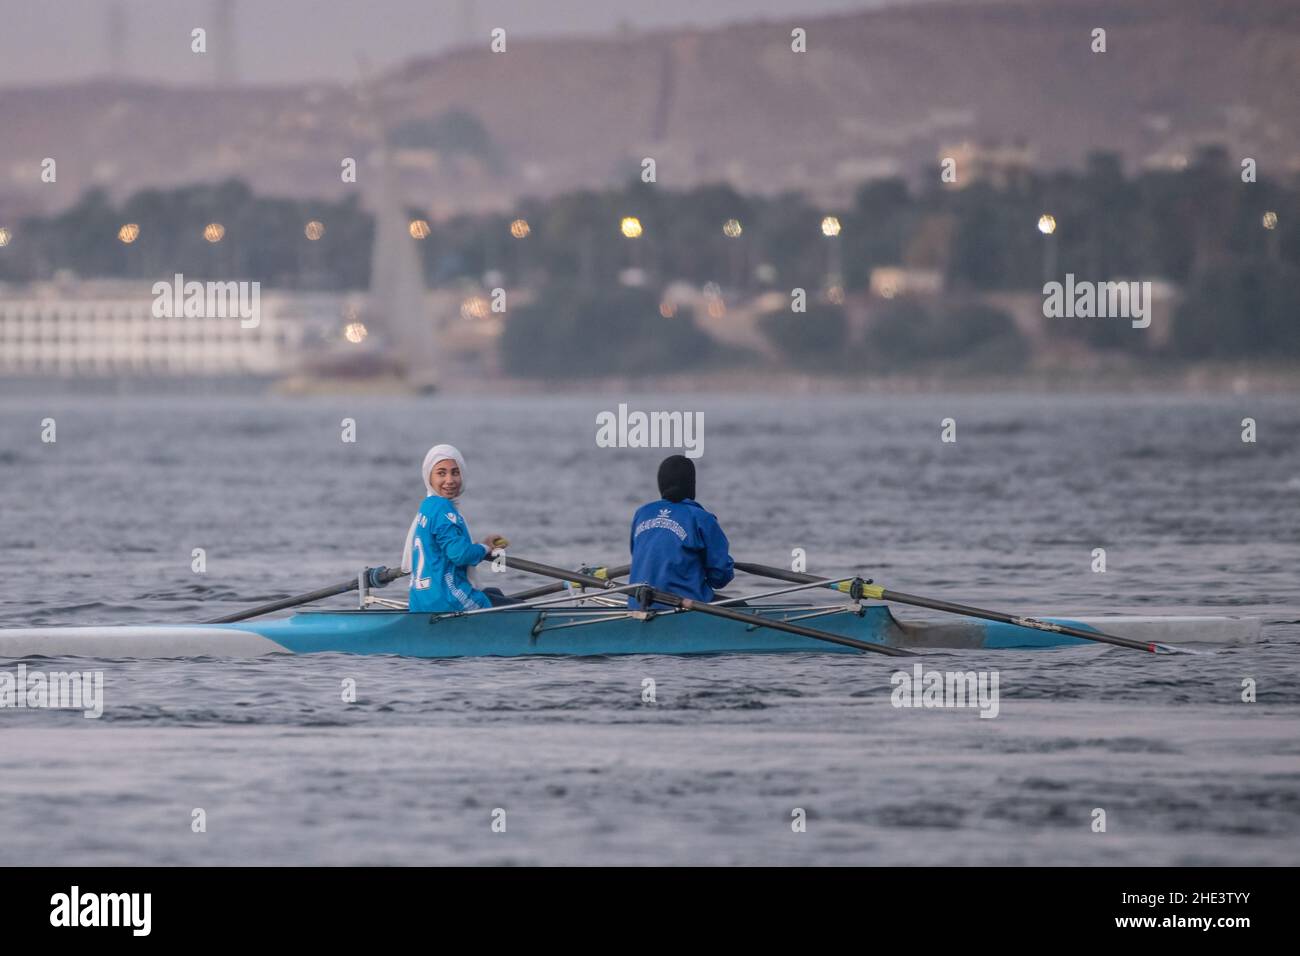 Egyptian women training in a double scull practicing rowing on the Nile River in Aswan, Egypt. Stock Photo